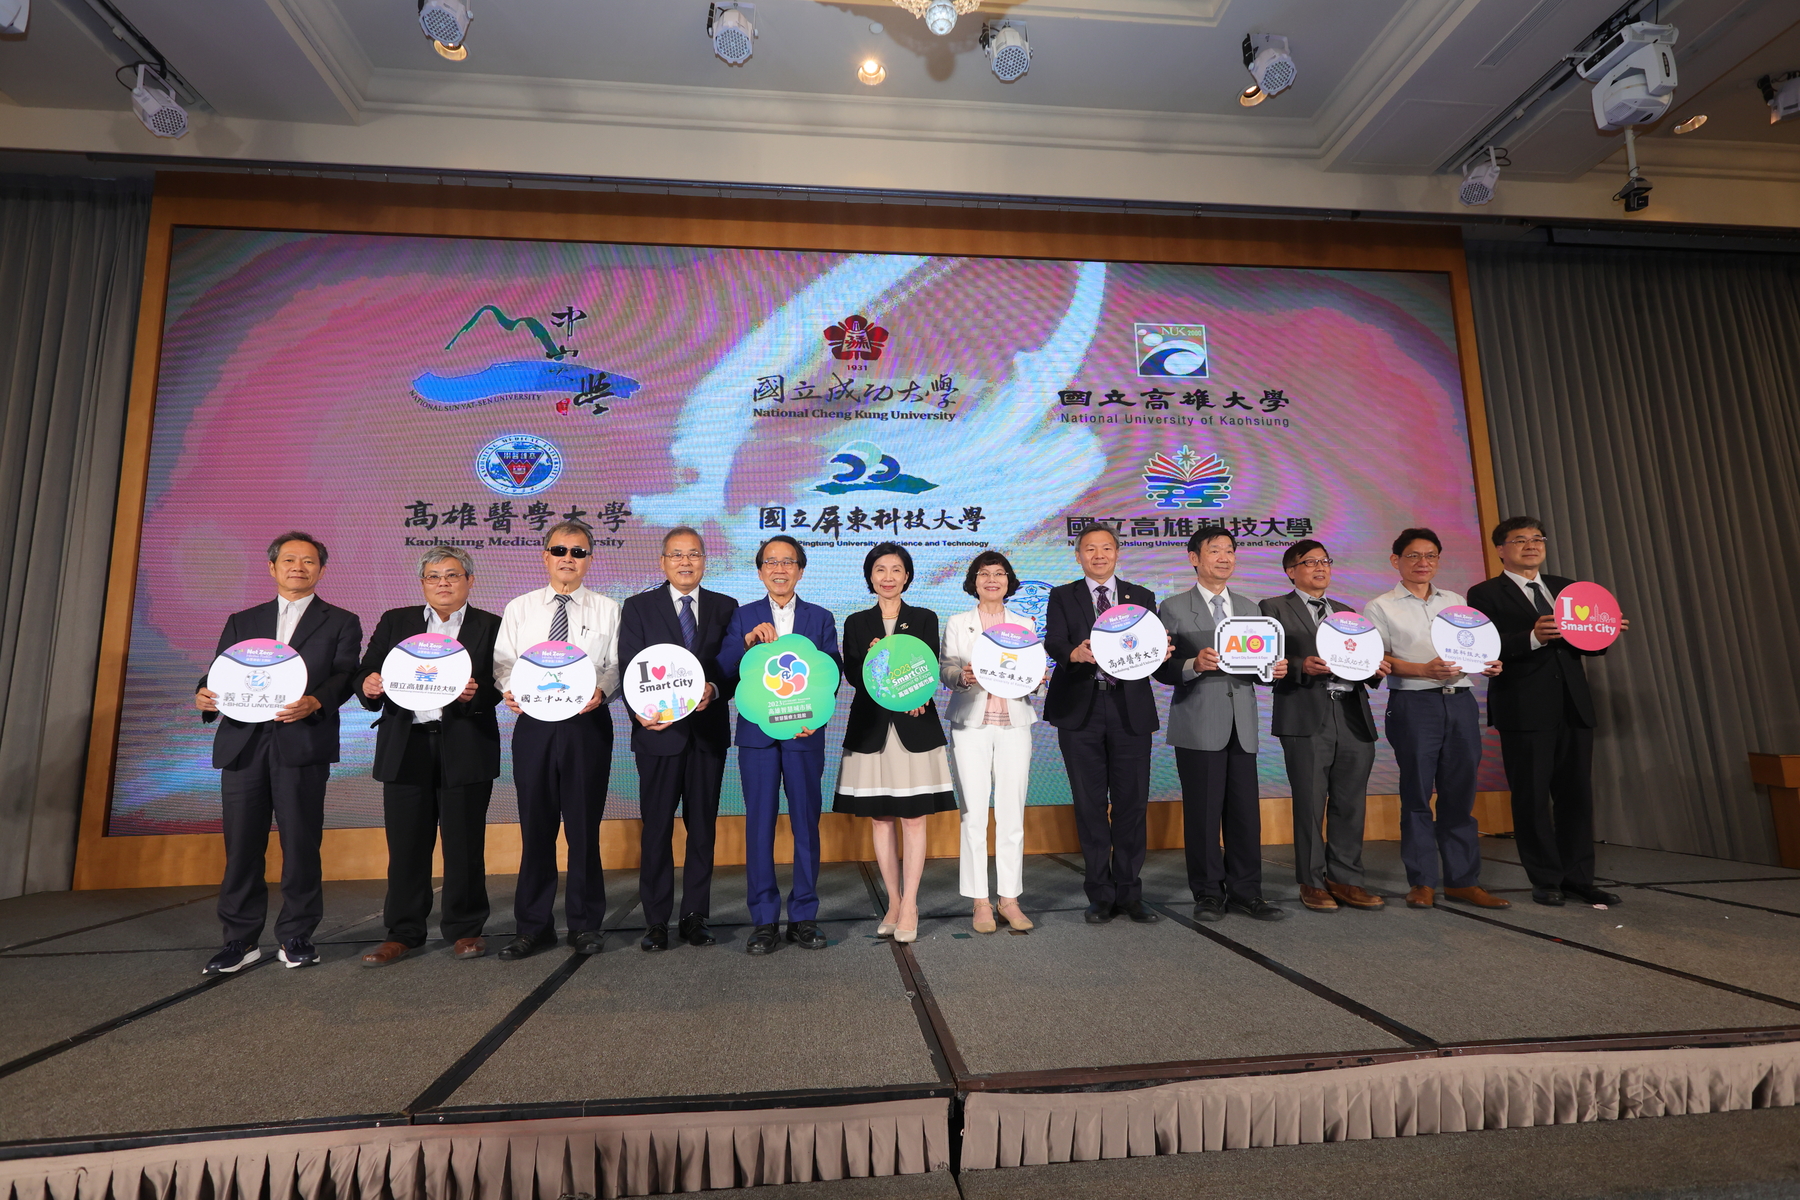 The 2023 Kaohsiung Smart City Summit & Expo is hosted at the Kaohsiung Exhibition Center